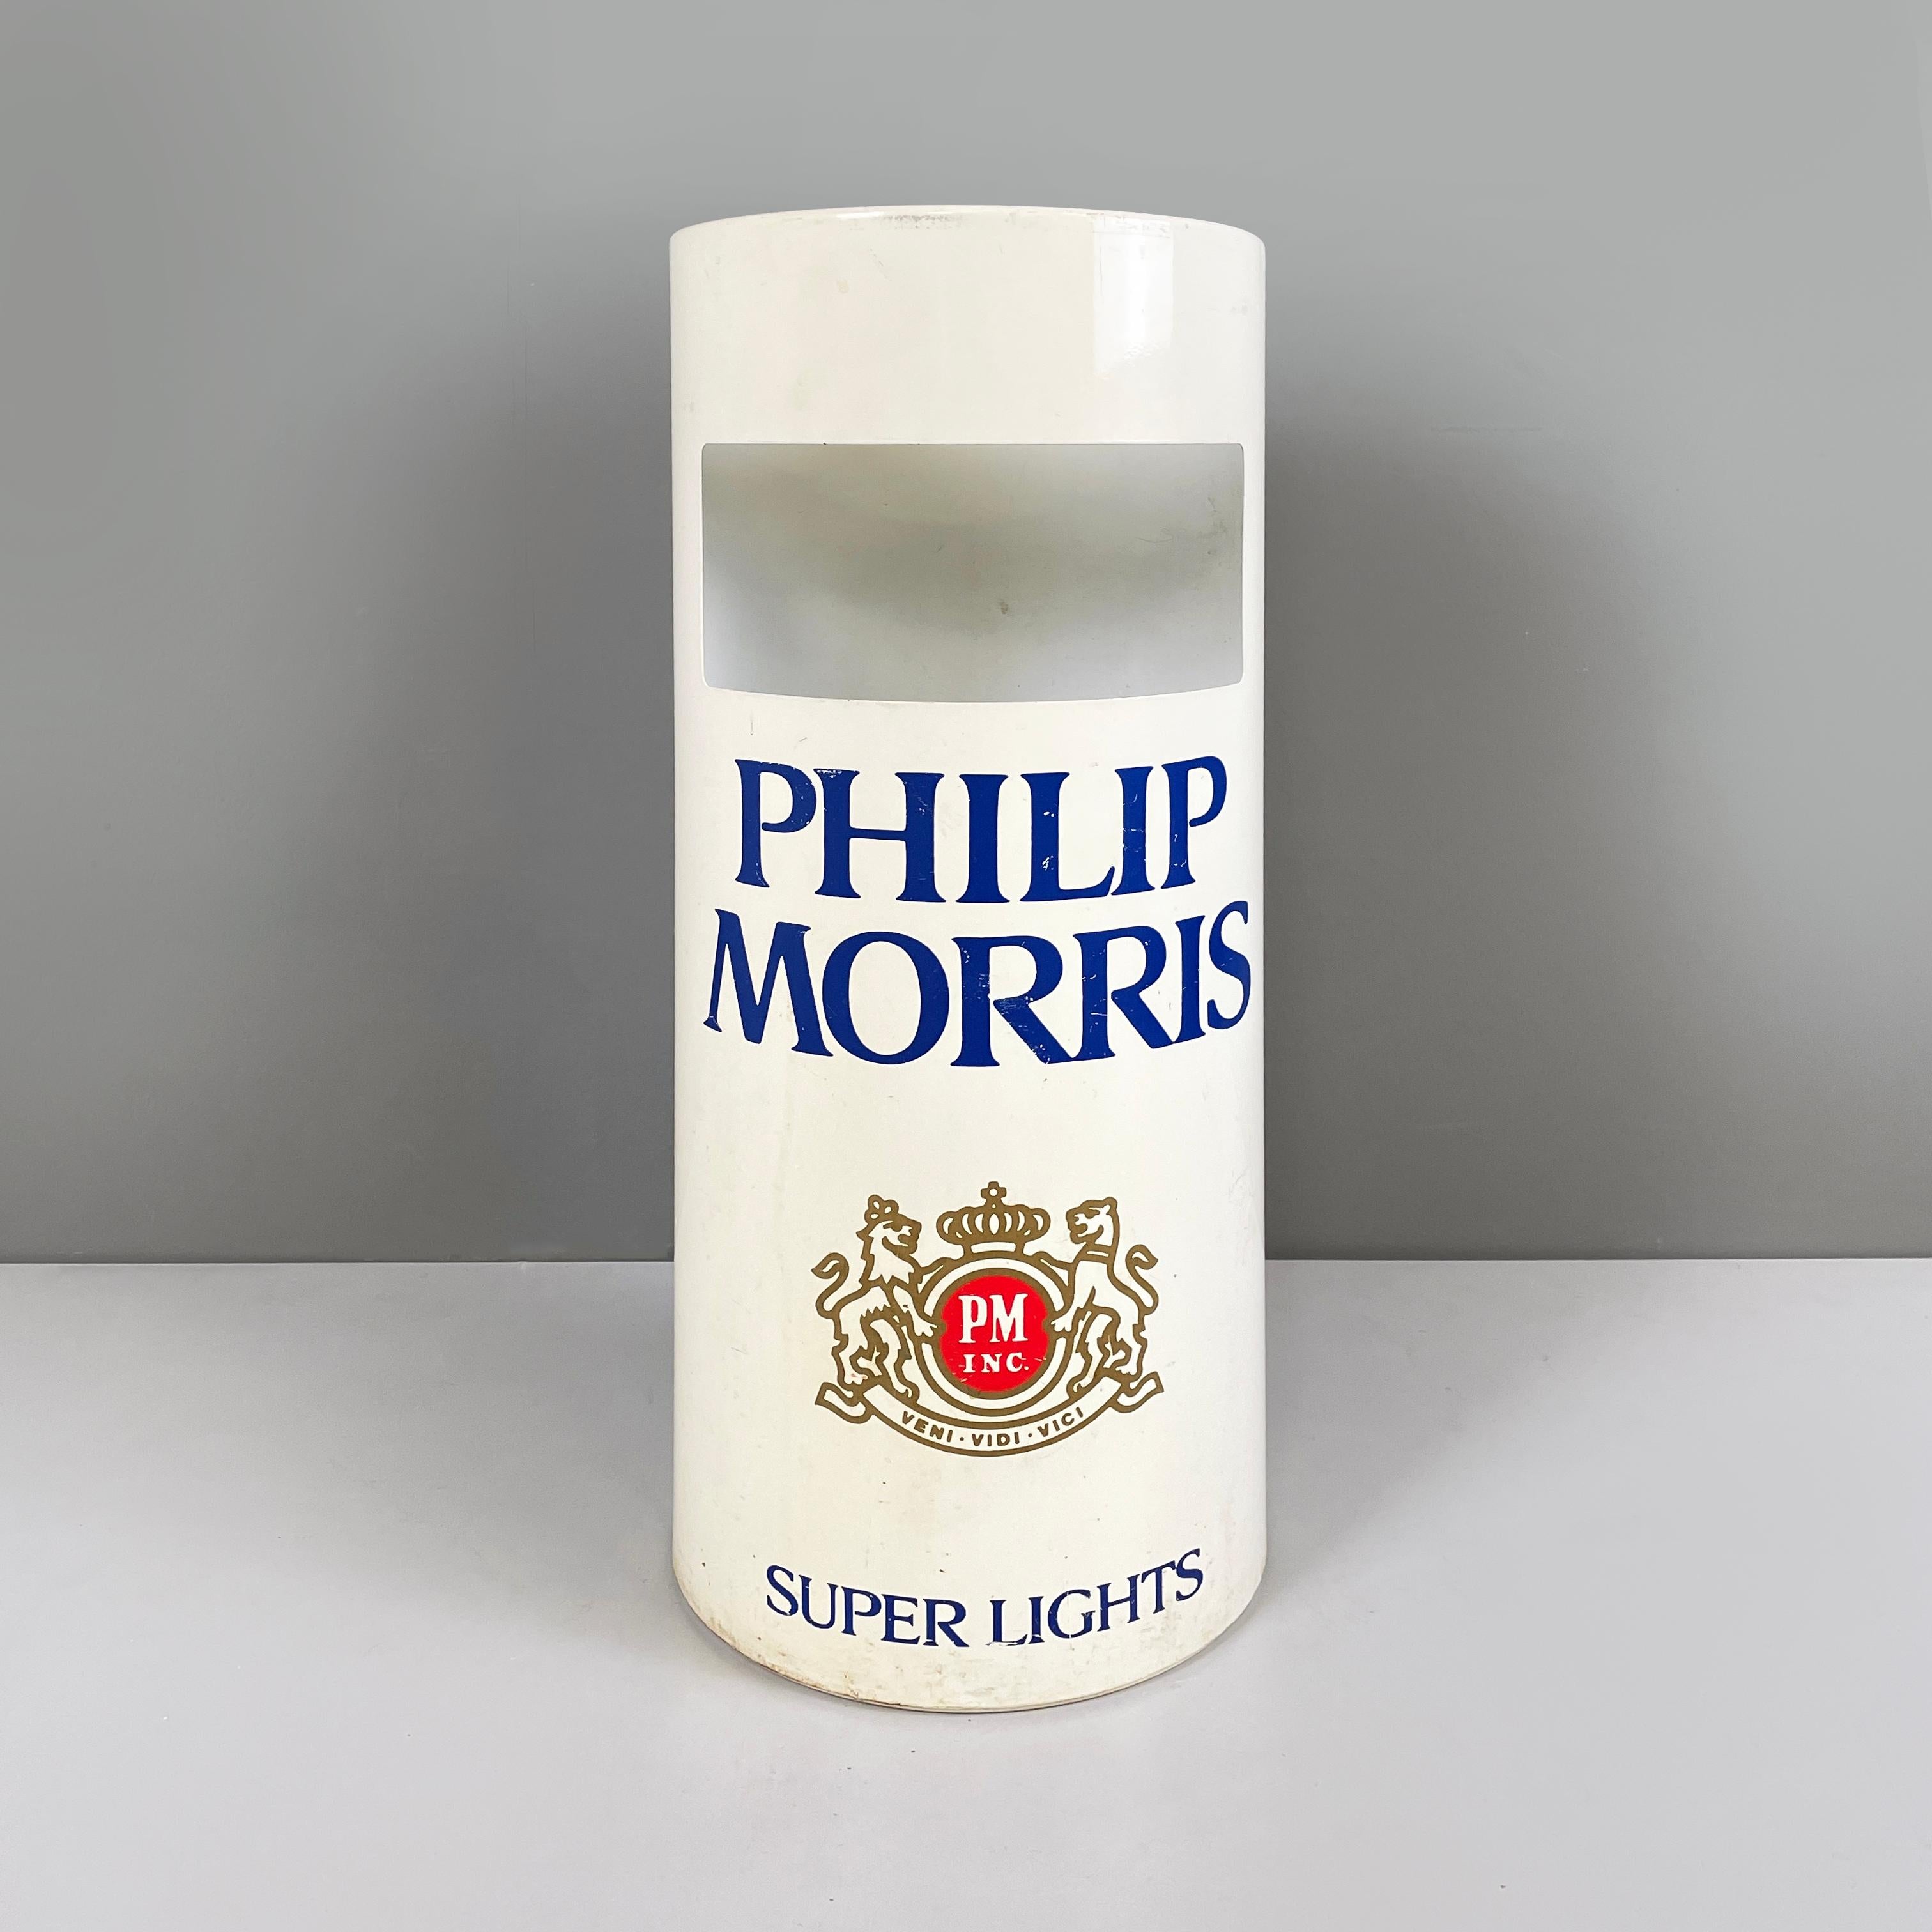 American modern Round base umbrella stand in white metal by Philip Morris cigarette, 1990s
Cylindrical umbrella stand in white metal with rounded upper profile. On the front it has a rectangular hole. On both sides there is the logo of the